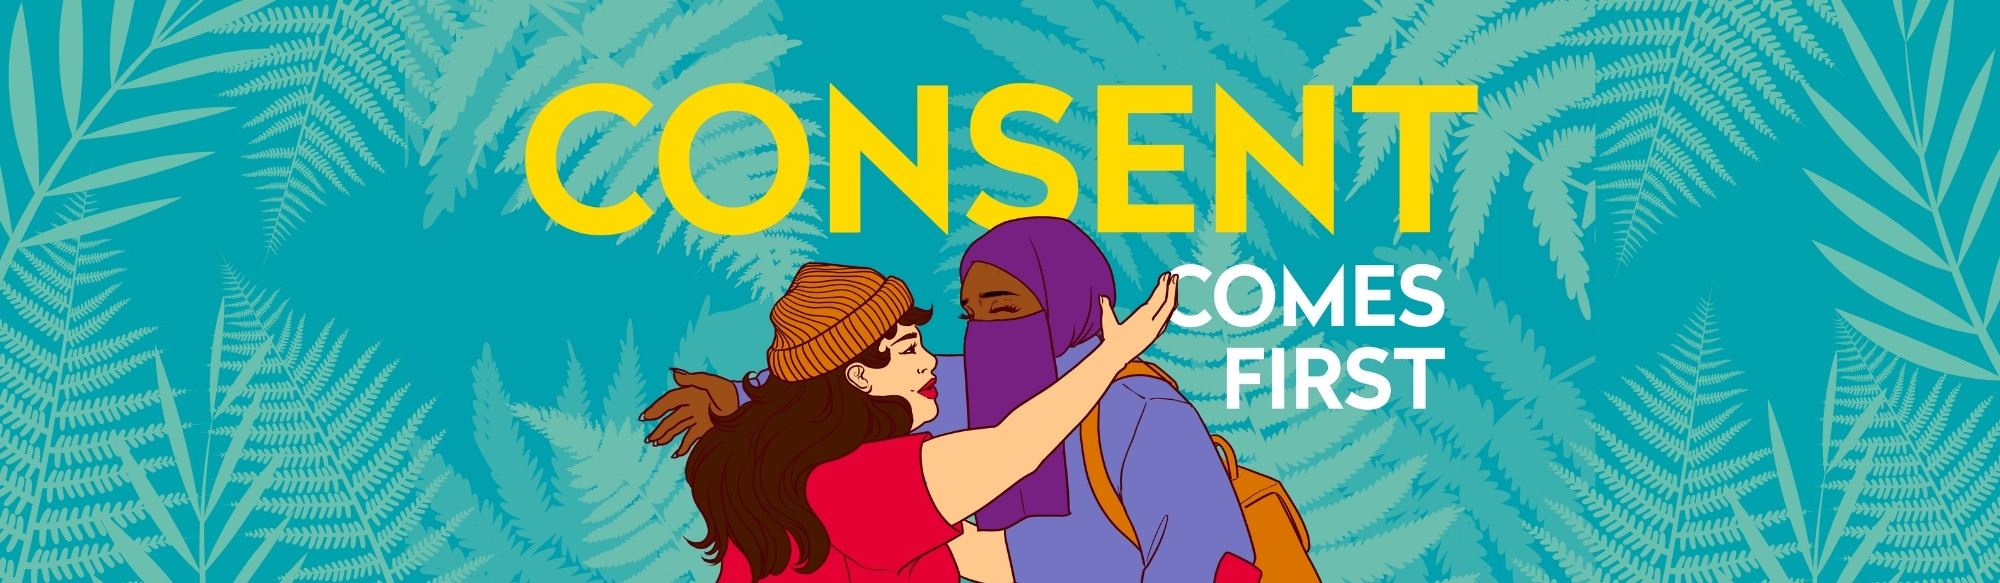 Illustration of two women embracing with the text "consent comes first" behind them with light green leaves around.